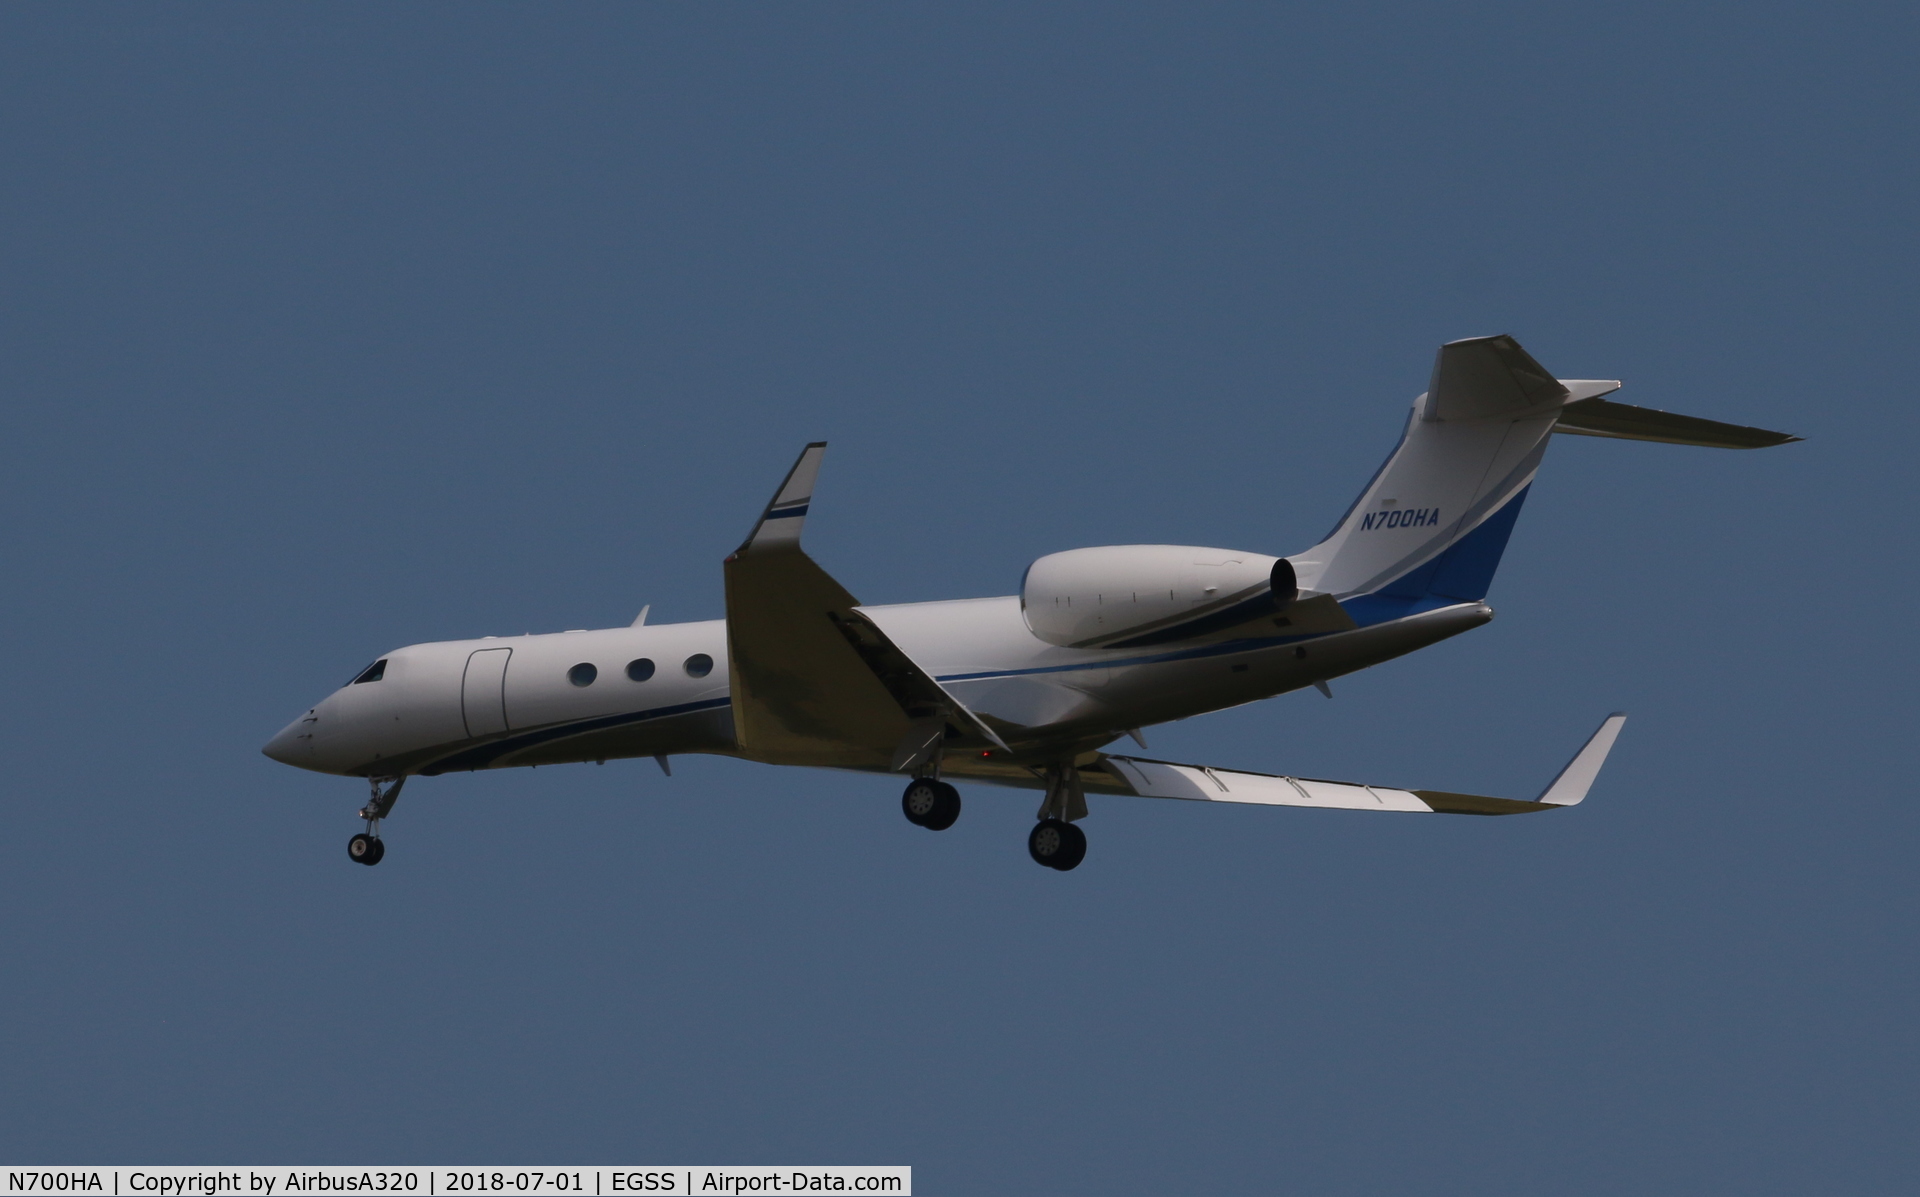 N700HA, 2001 Gulfstream Aerospace G-V C/N 634, Arriving at Stansted